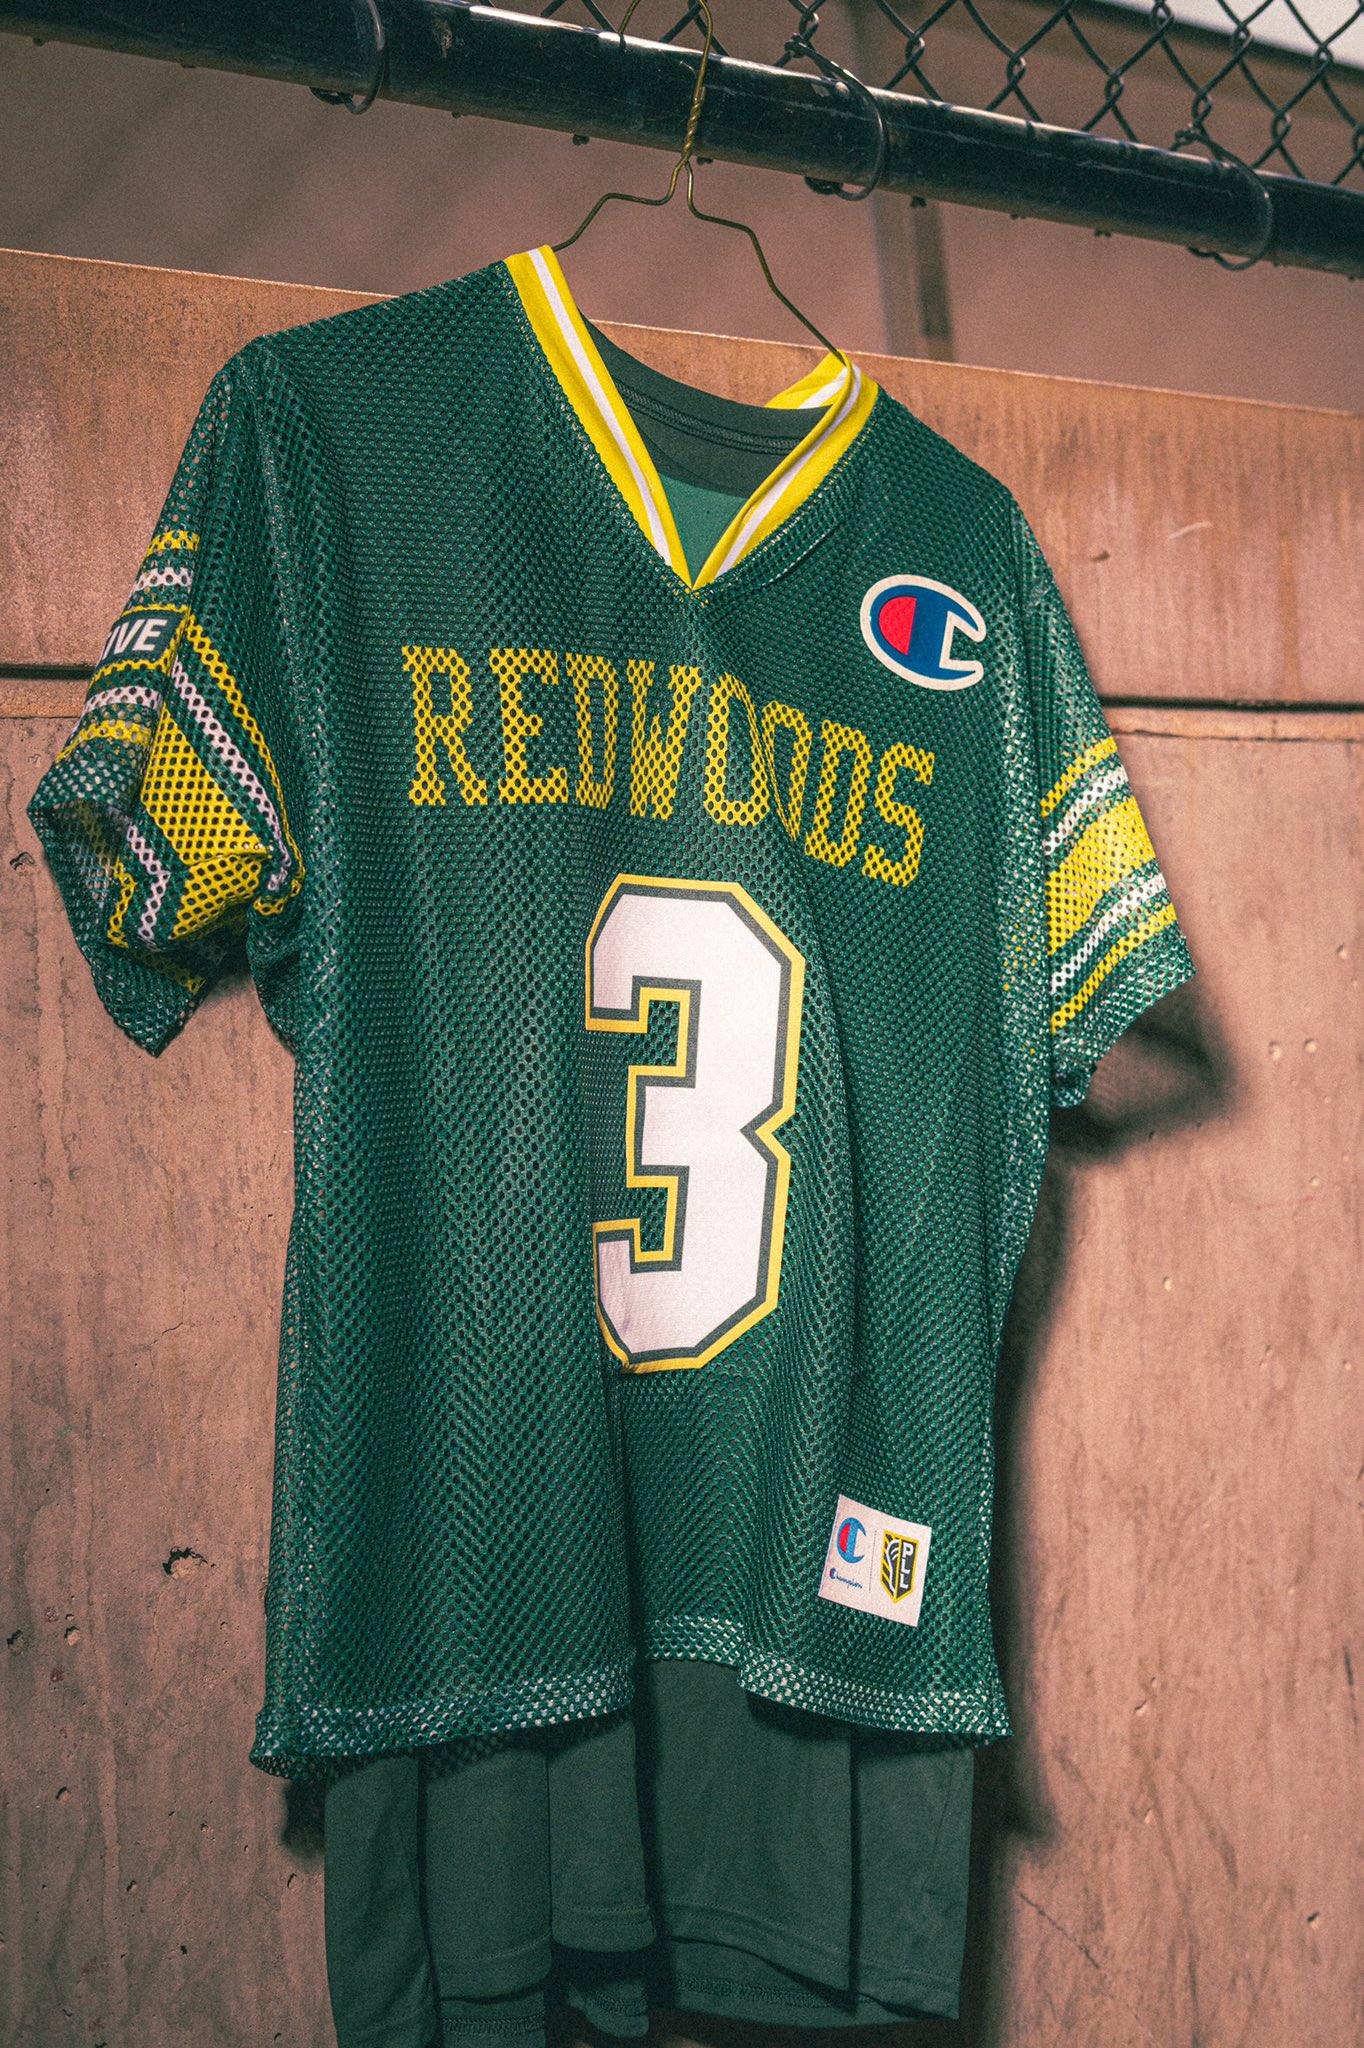 Redwoods Lacrosse Club on X: Woods are rolling in a new (or